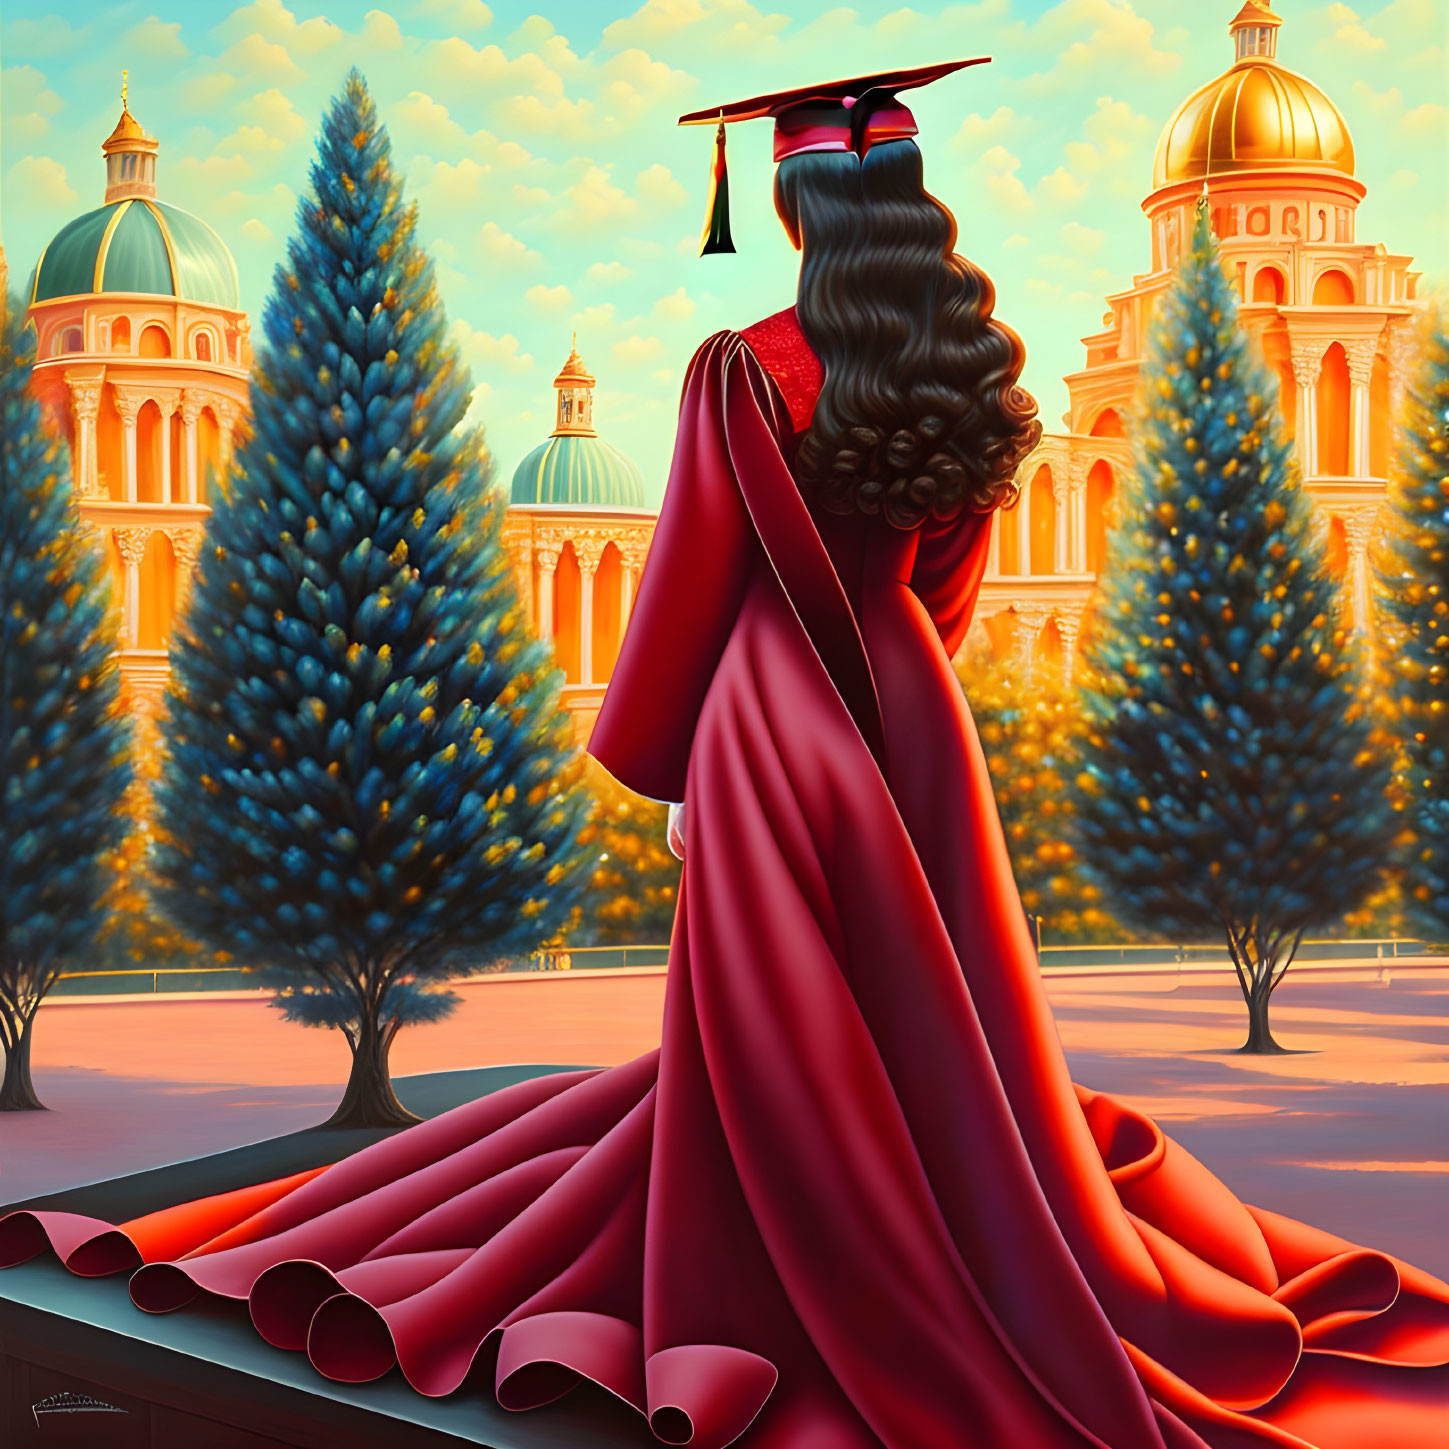 Illustration of woman in red graduation gown walking towards grand domed buildings amid tall blue trees